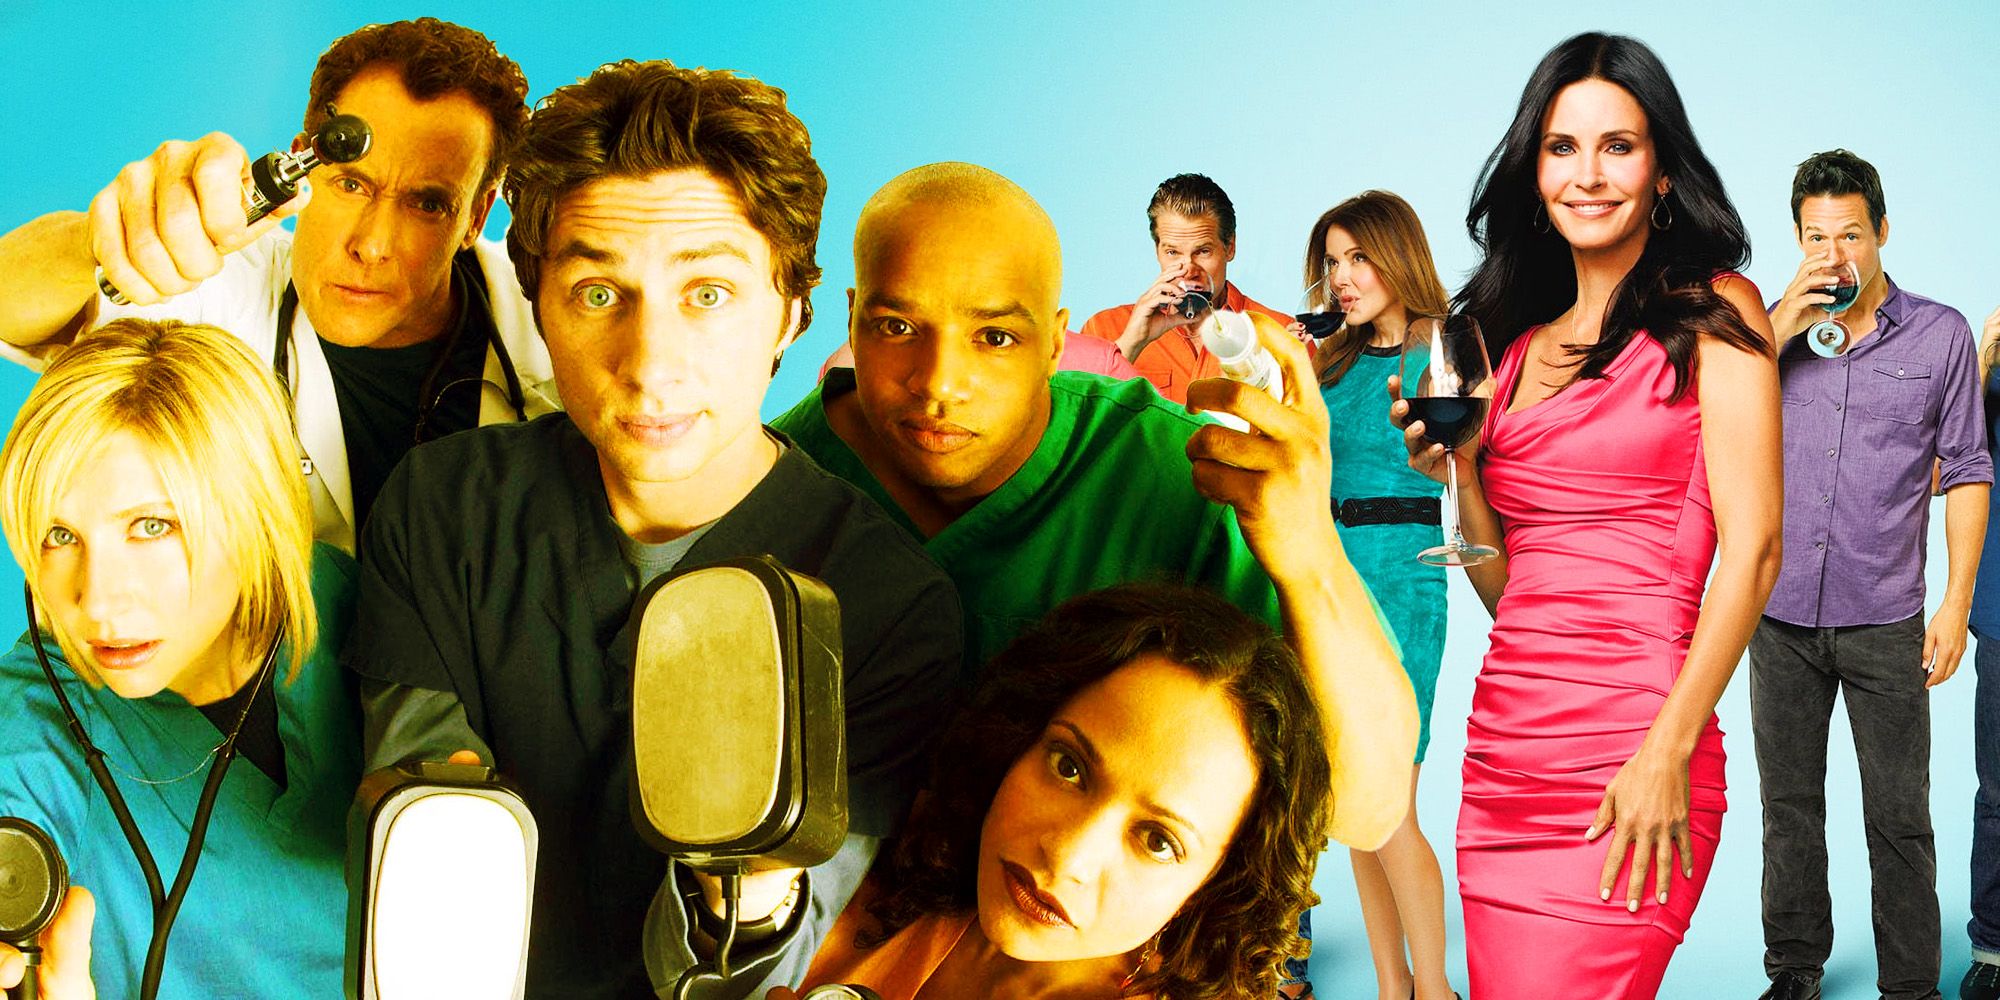 Composite image of the main casts of Scrubs and Cougar Town.